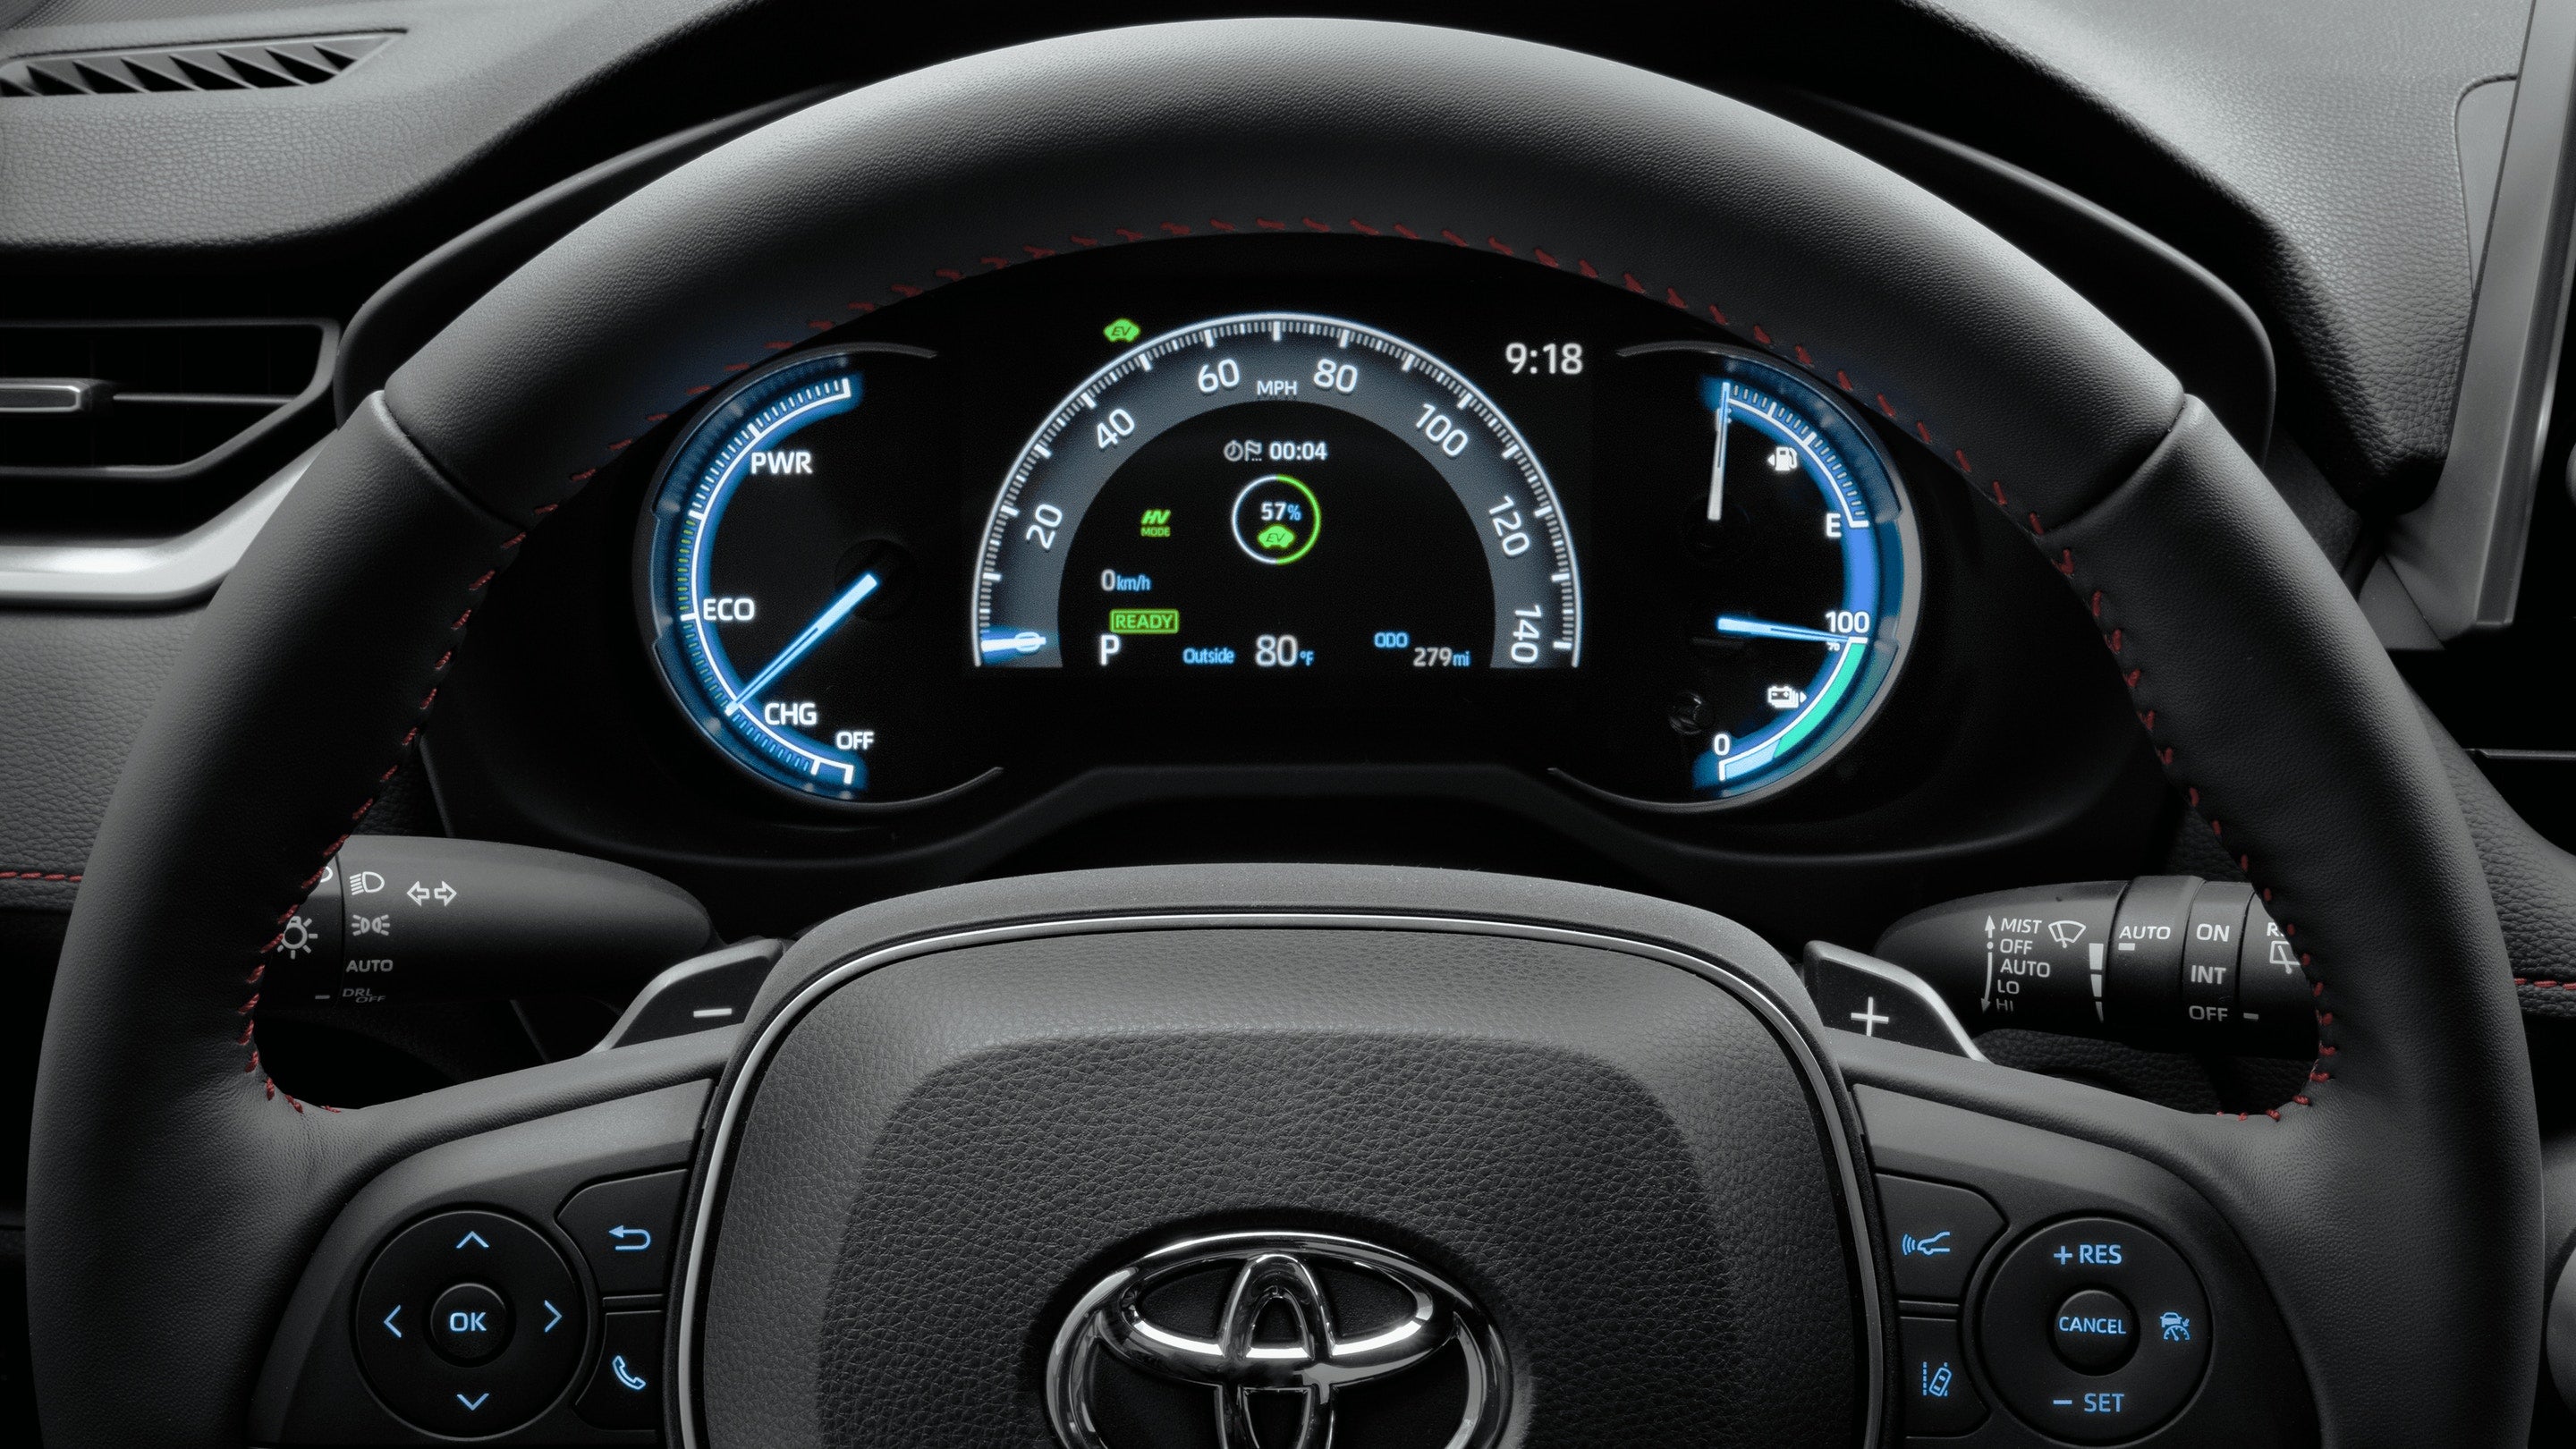 New 2021 Toyota RAV4 Prime Performance - Falmouth Toyota of Bourne, MA - Serving Cape Cod, Hyannis, Plymouth MA